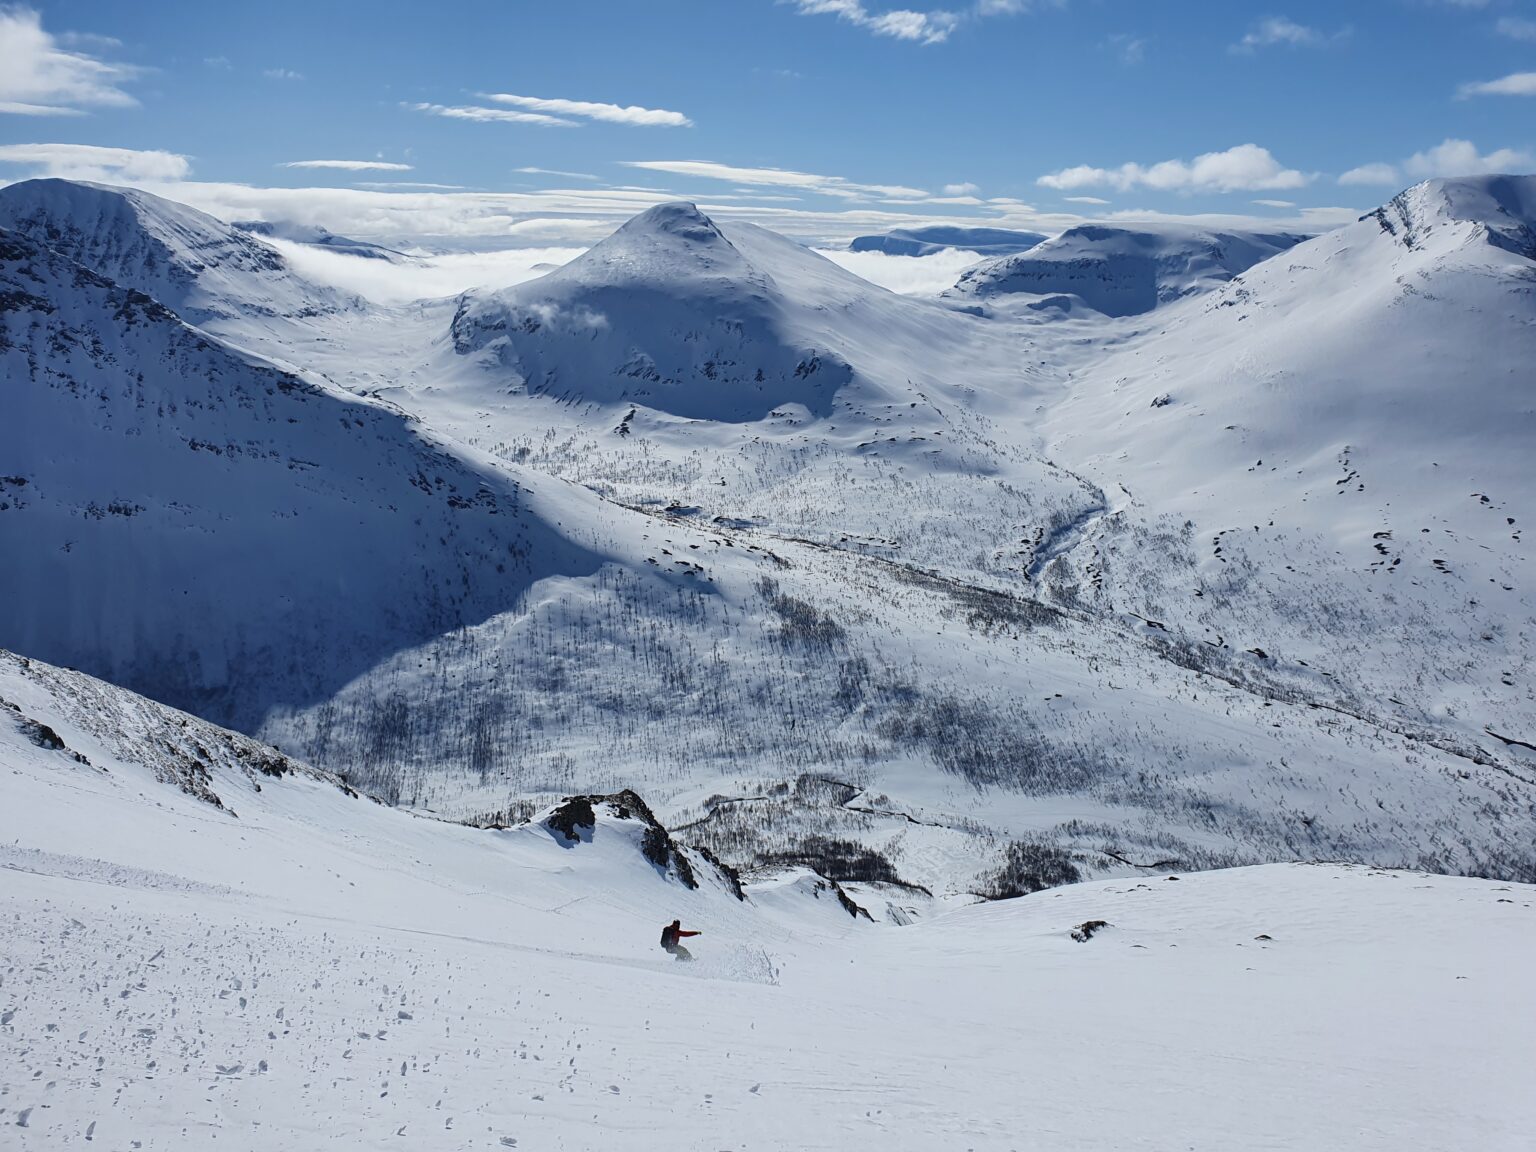 Looking down the entire south chute of Tamokfjellet while snowboarding in powder conditions